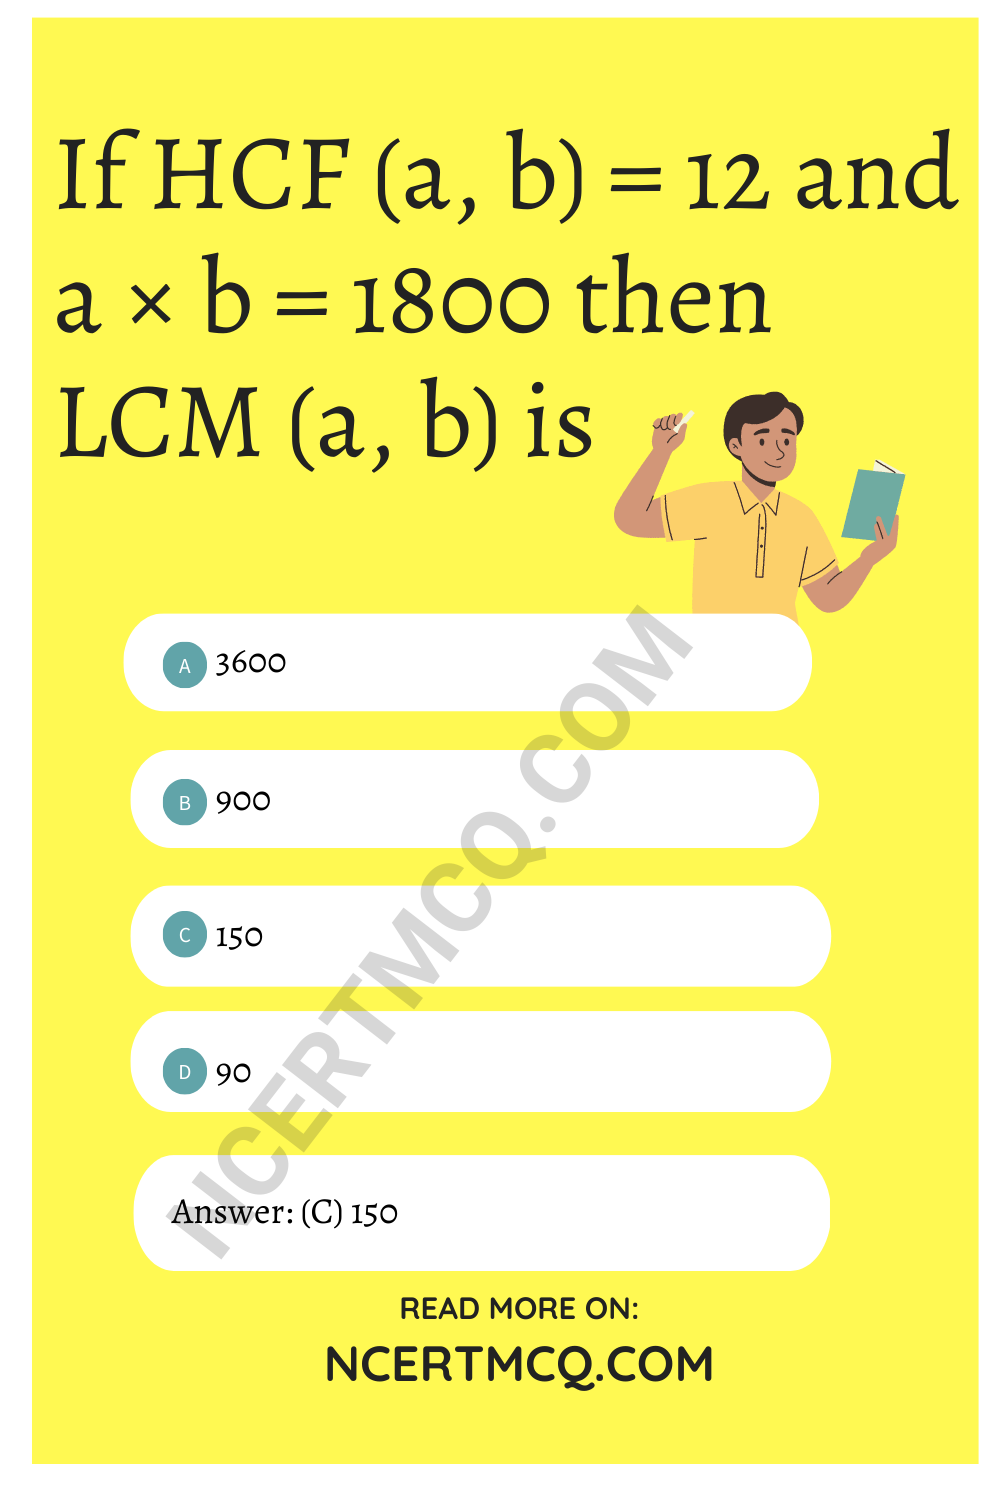 If HCF (a, b) = 12 and a × b = 1800 then LCM (a, b) is